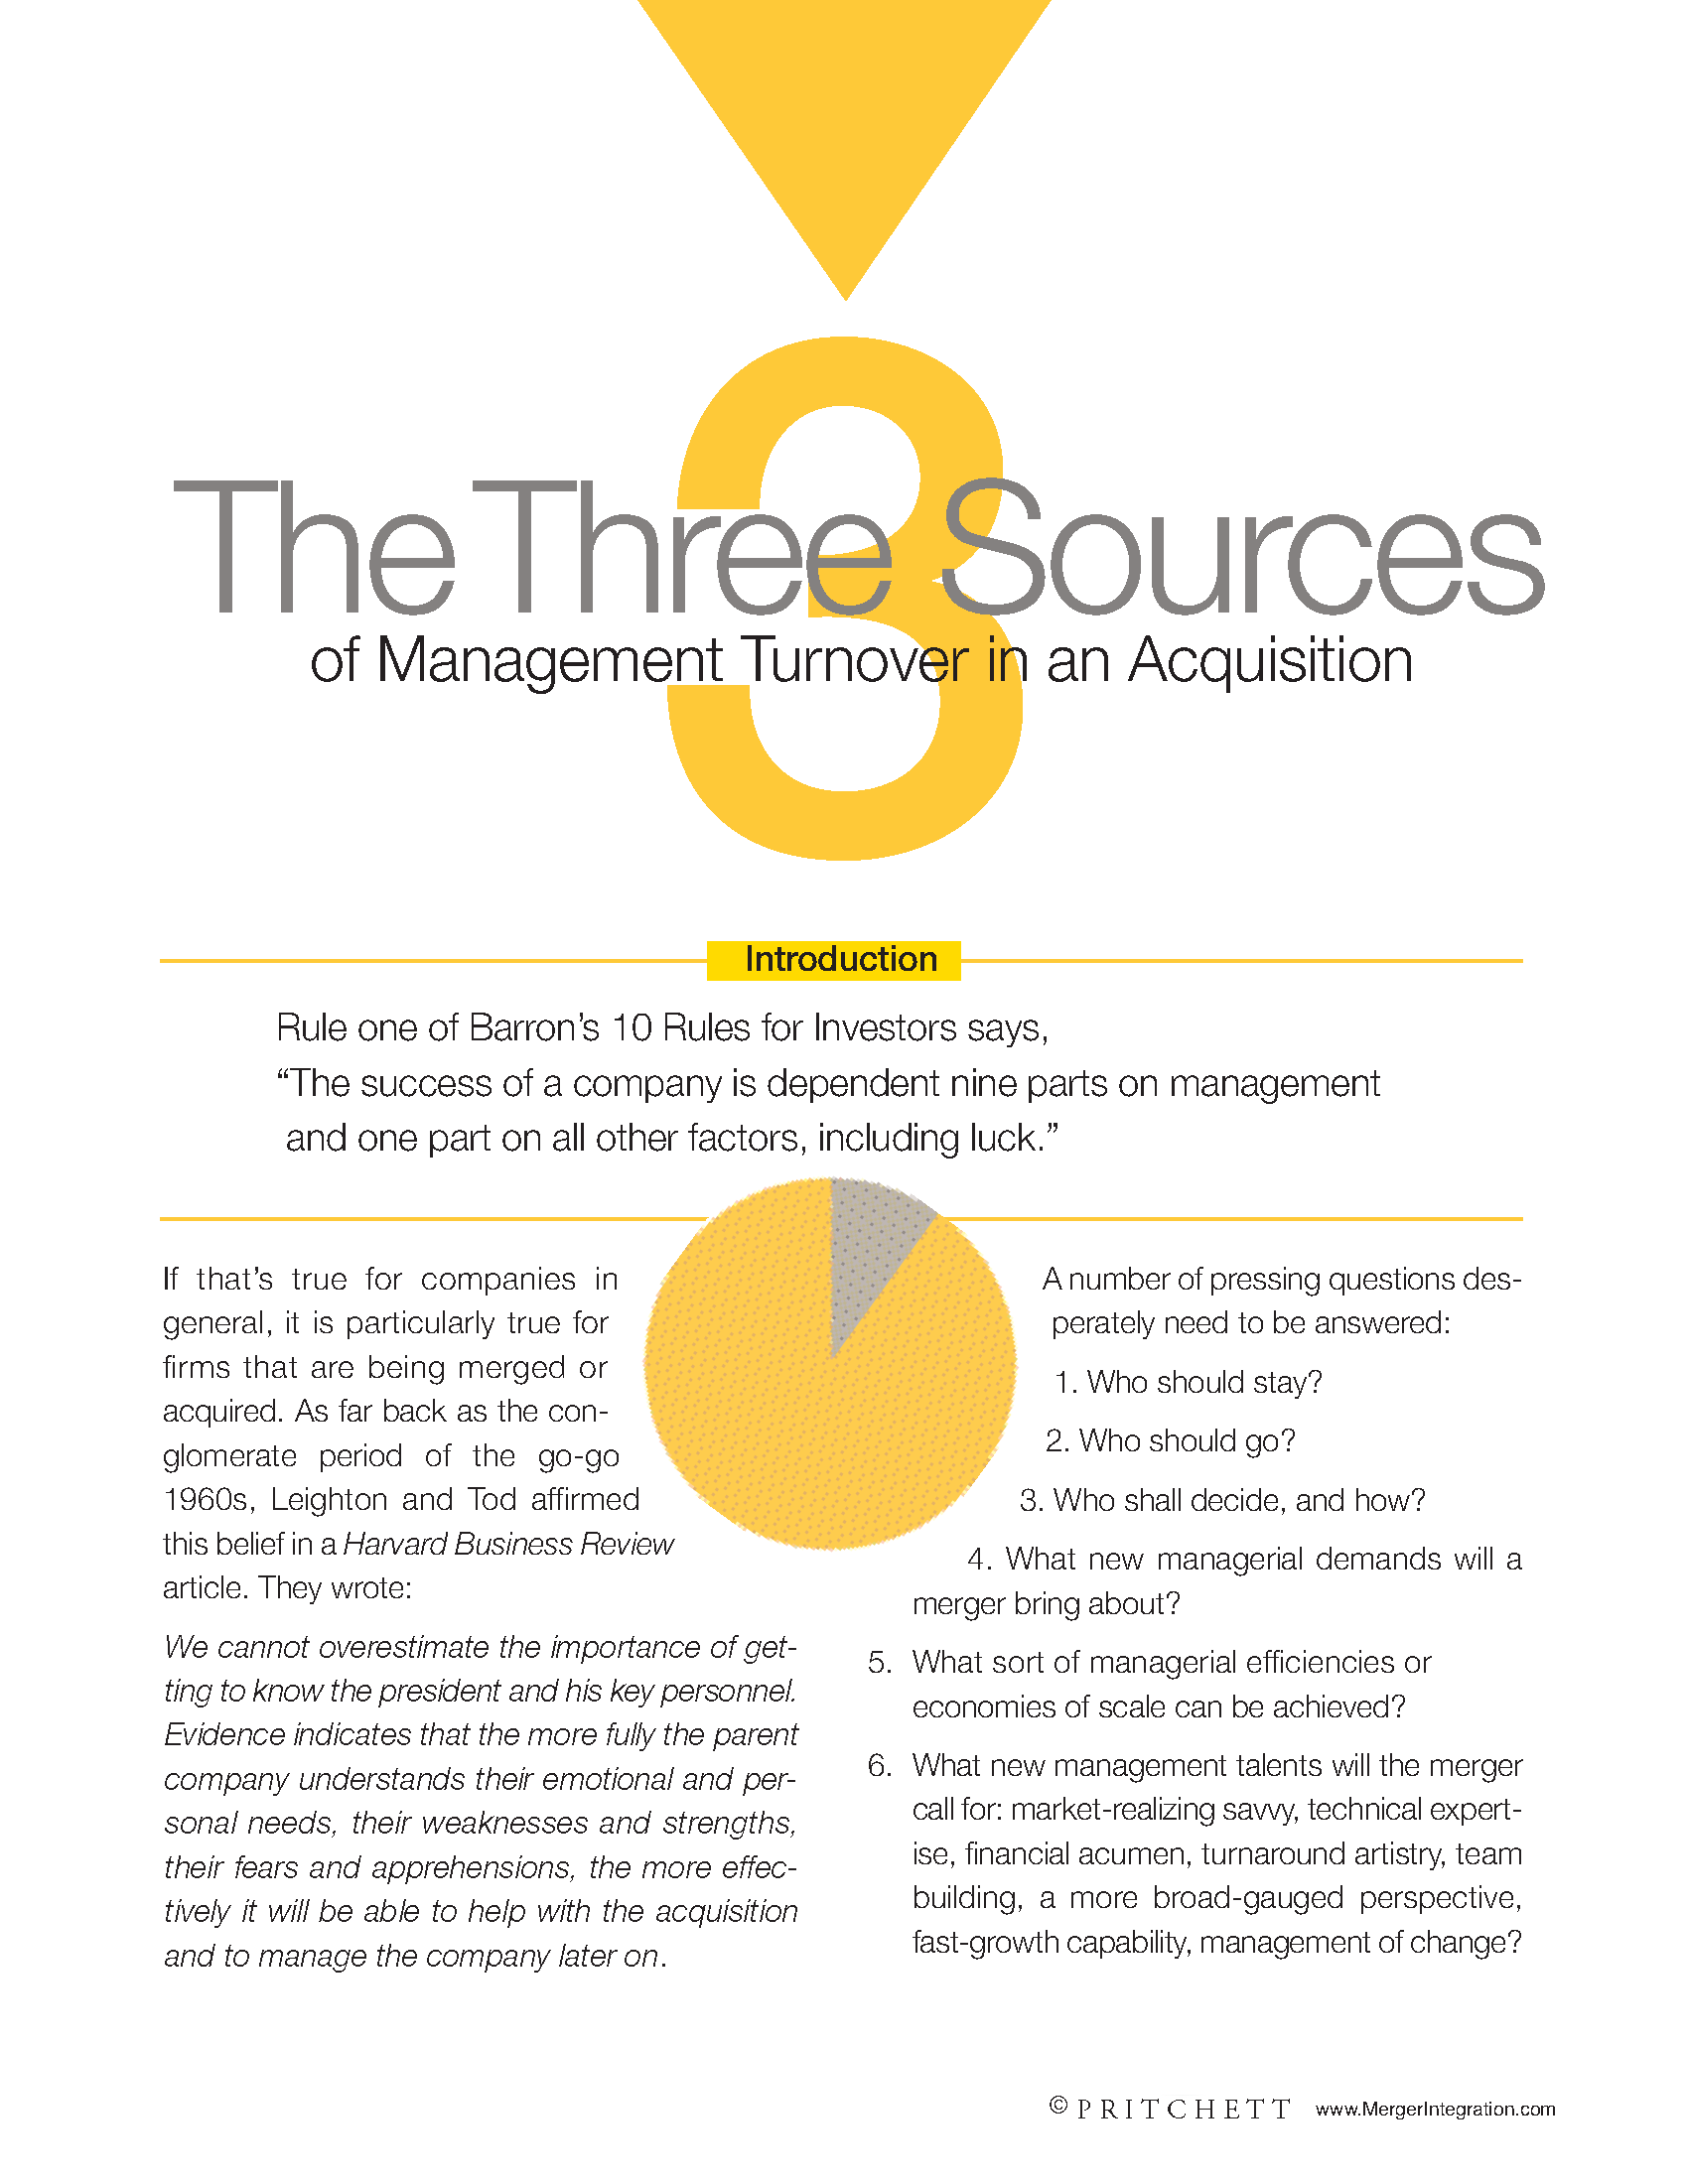 The Three sources of Management Turnover